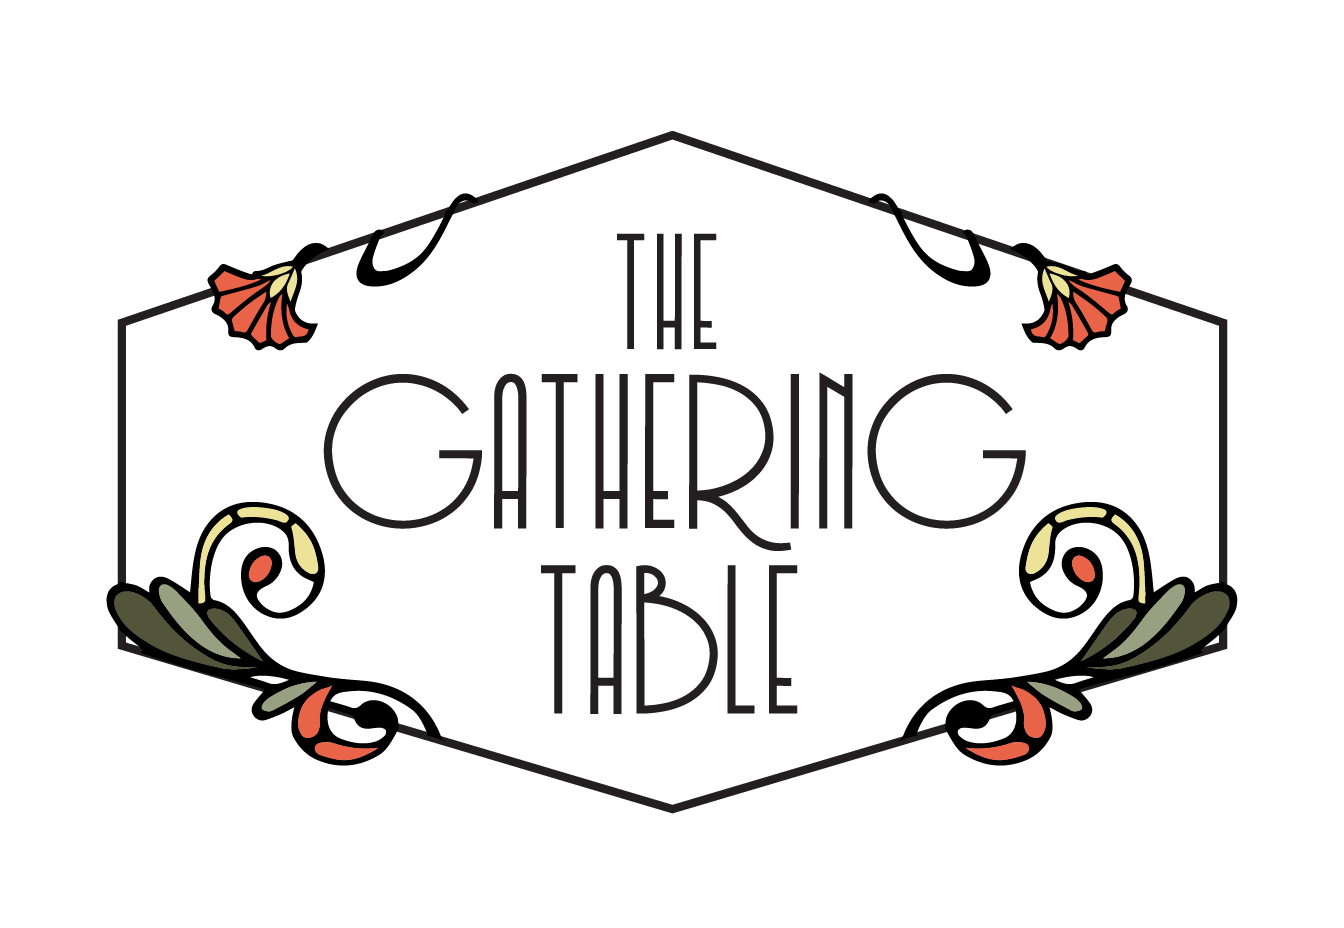 The Gathering Table